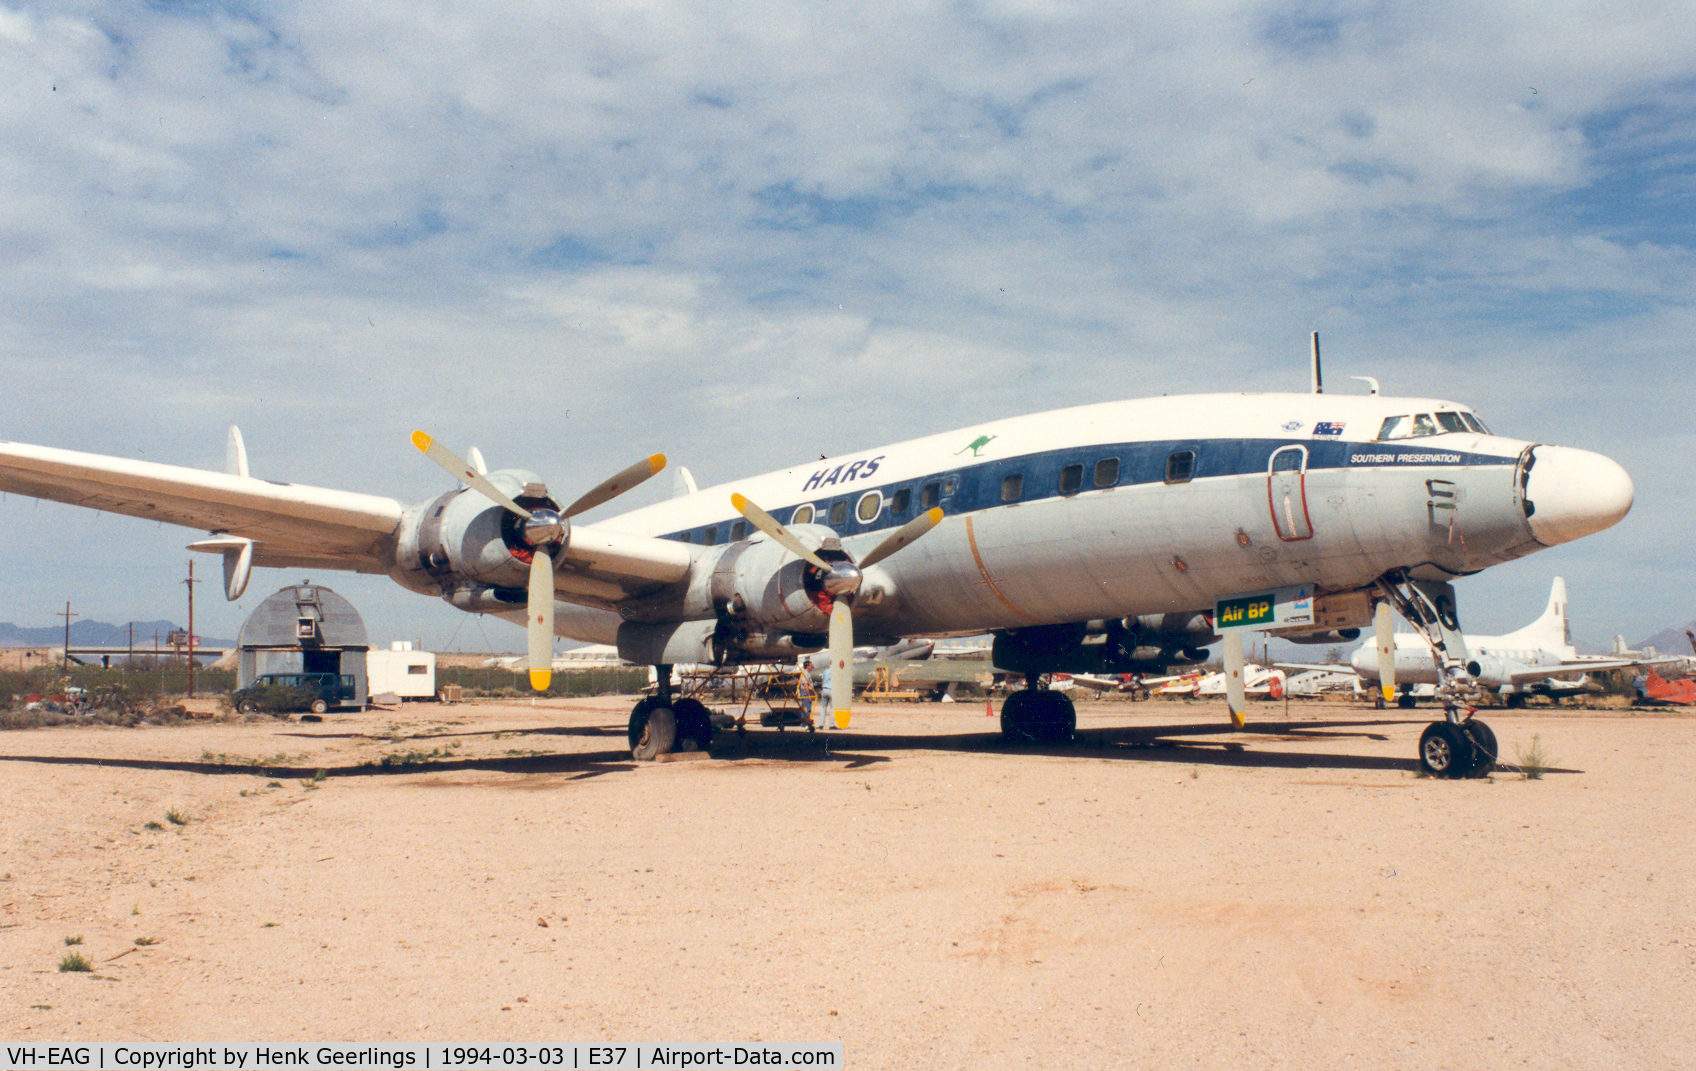 VH-EAG, 1955 Lockheed L-1049F Super Constellation C/N 4176, ex 54-0157

After restoration at Pima Aviation Museum by members of HARS  the Superconnie flew to Australie.
New regi VH-EAG 